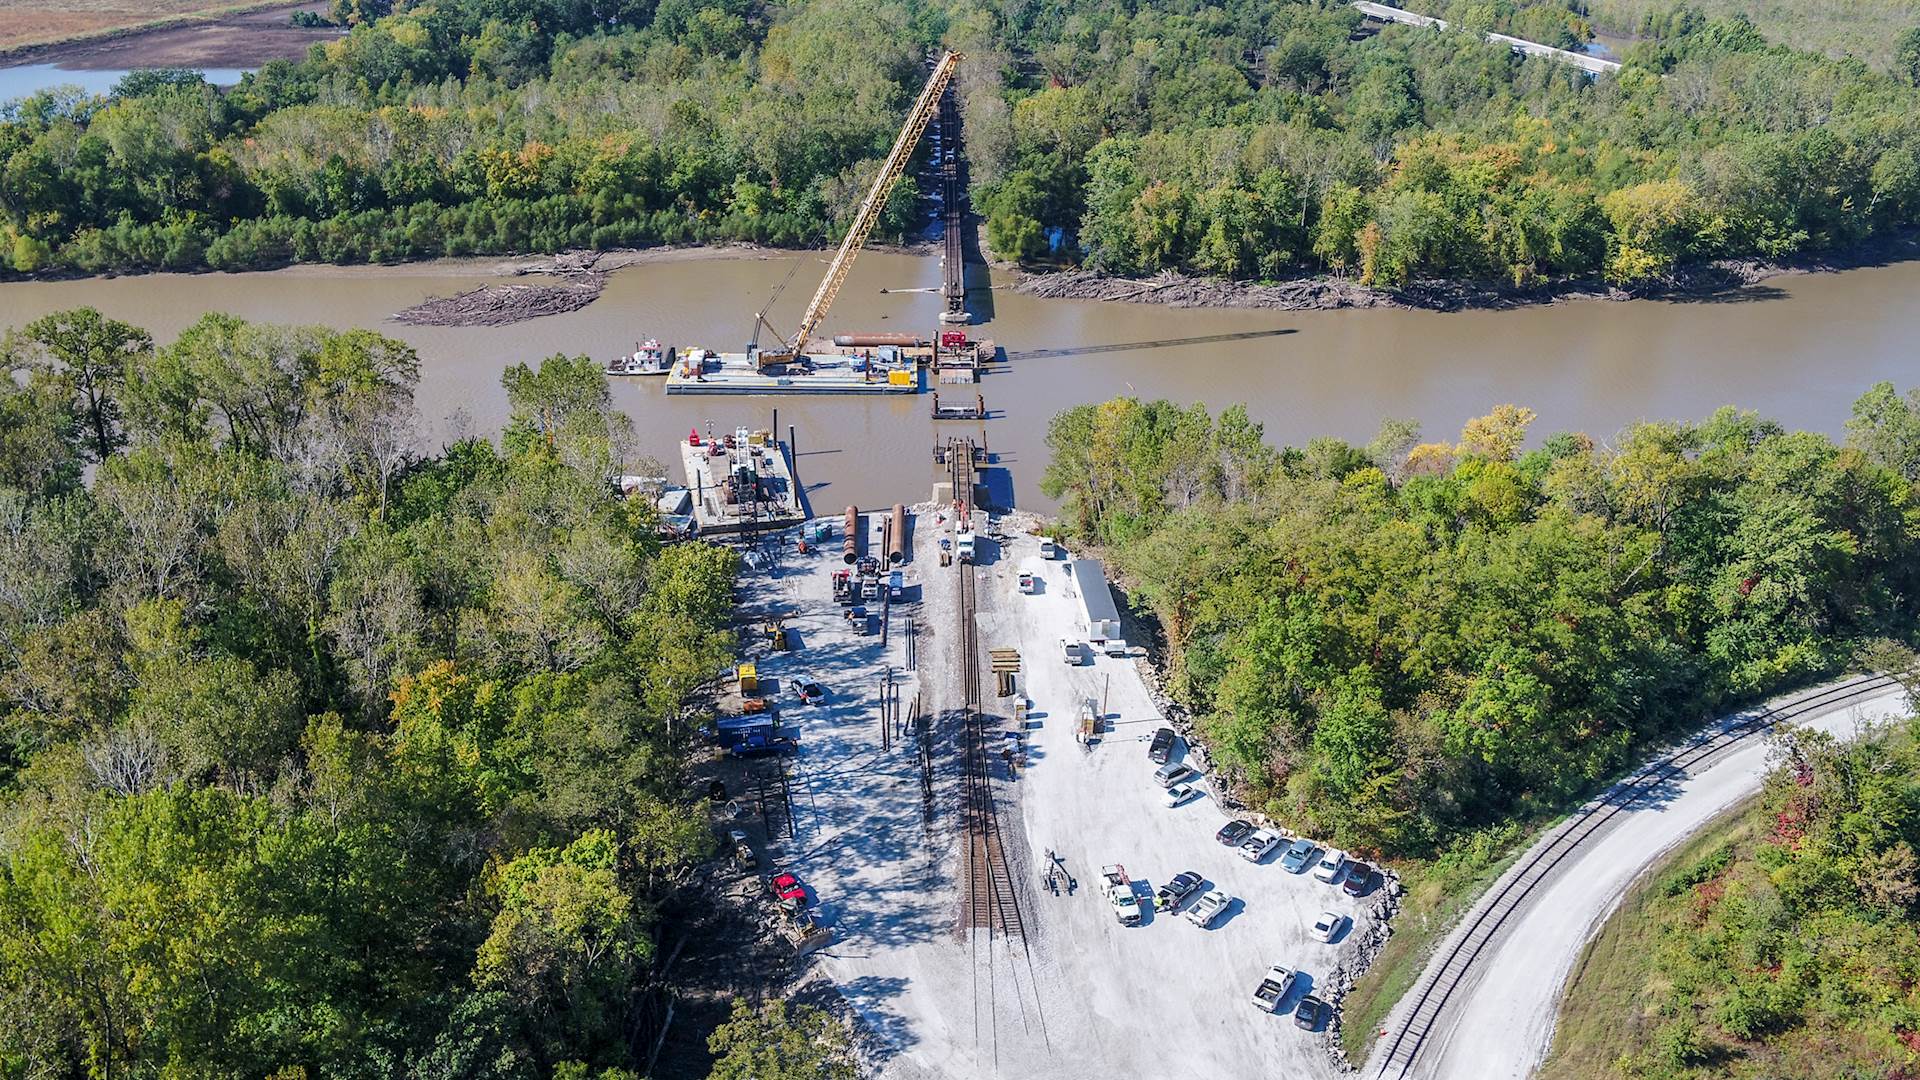 Reconstruction takes place for washed-out bridge over river.